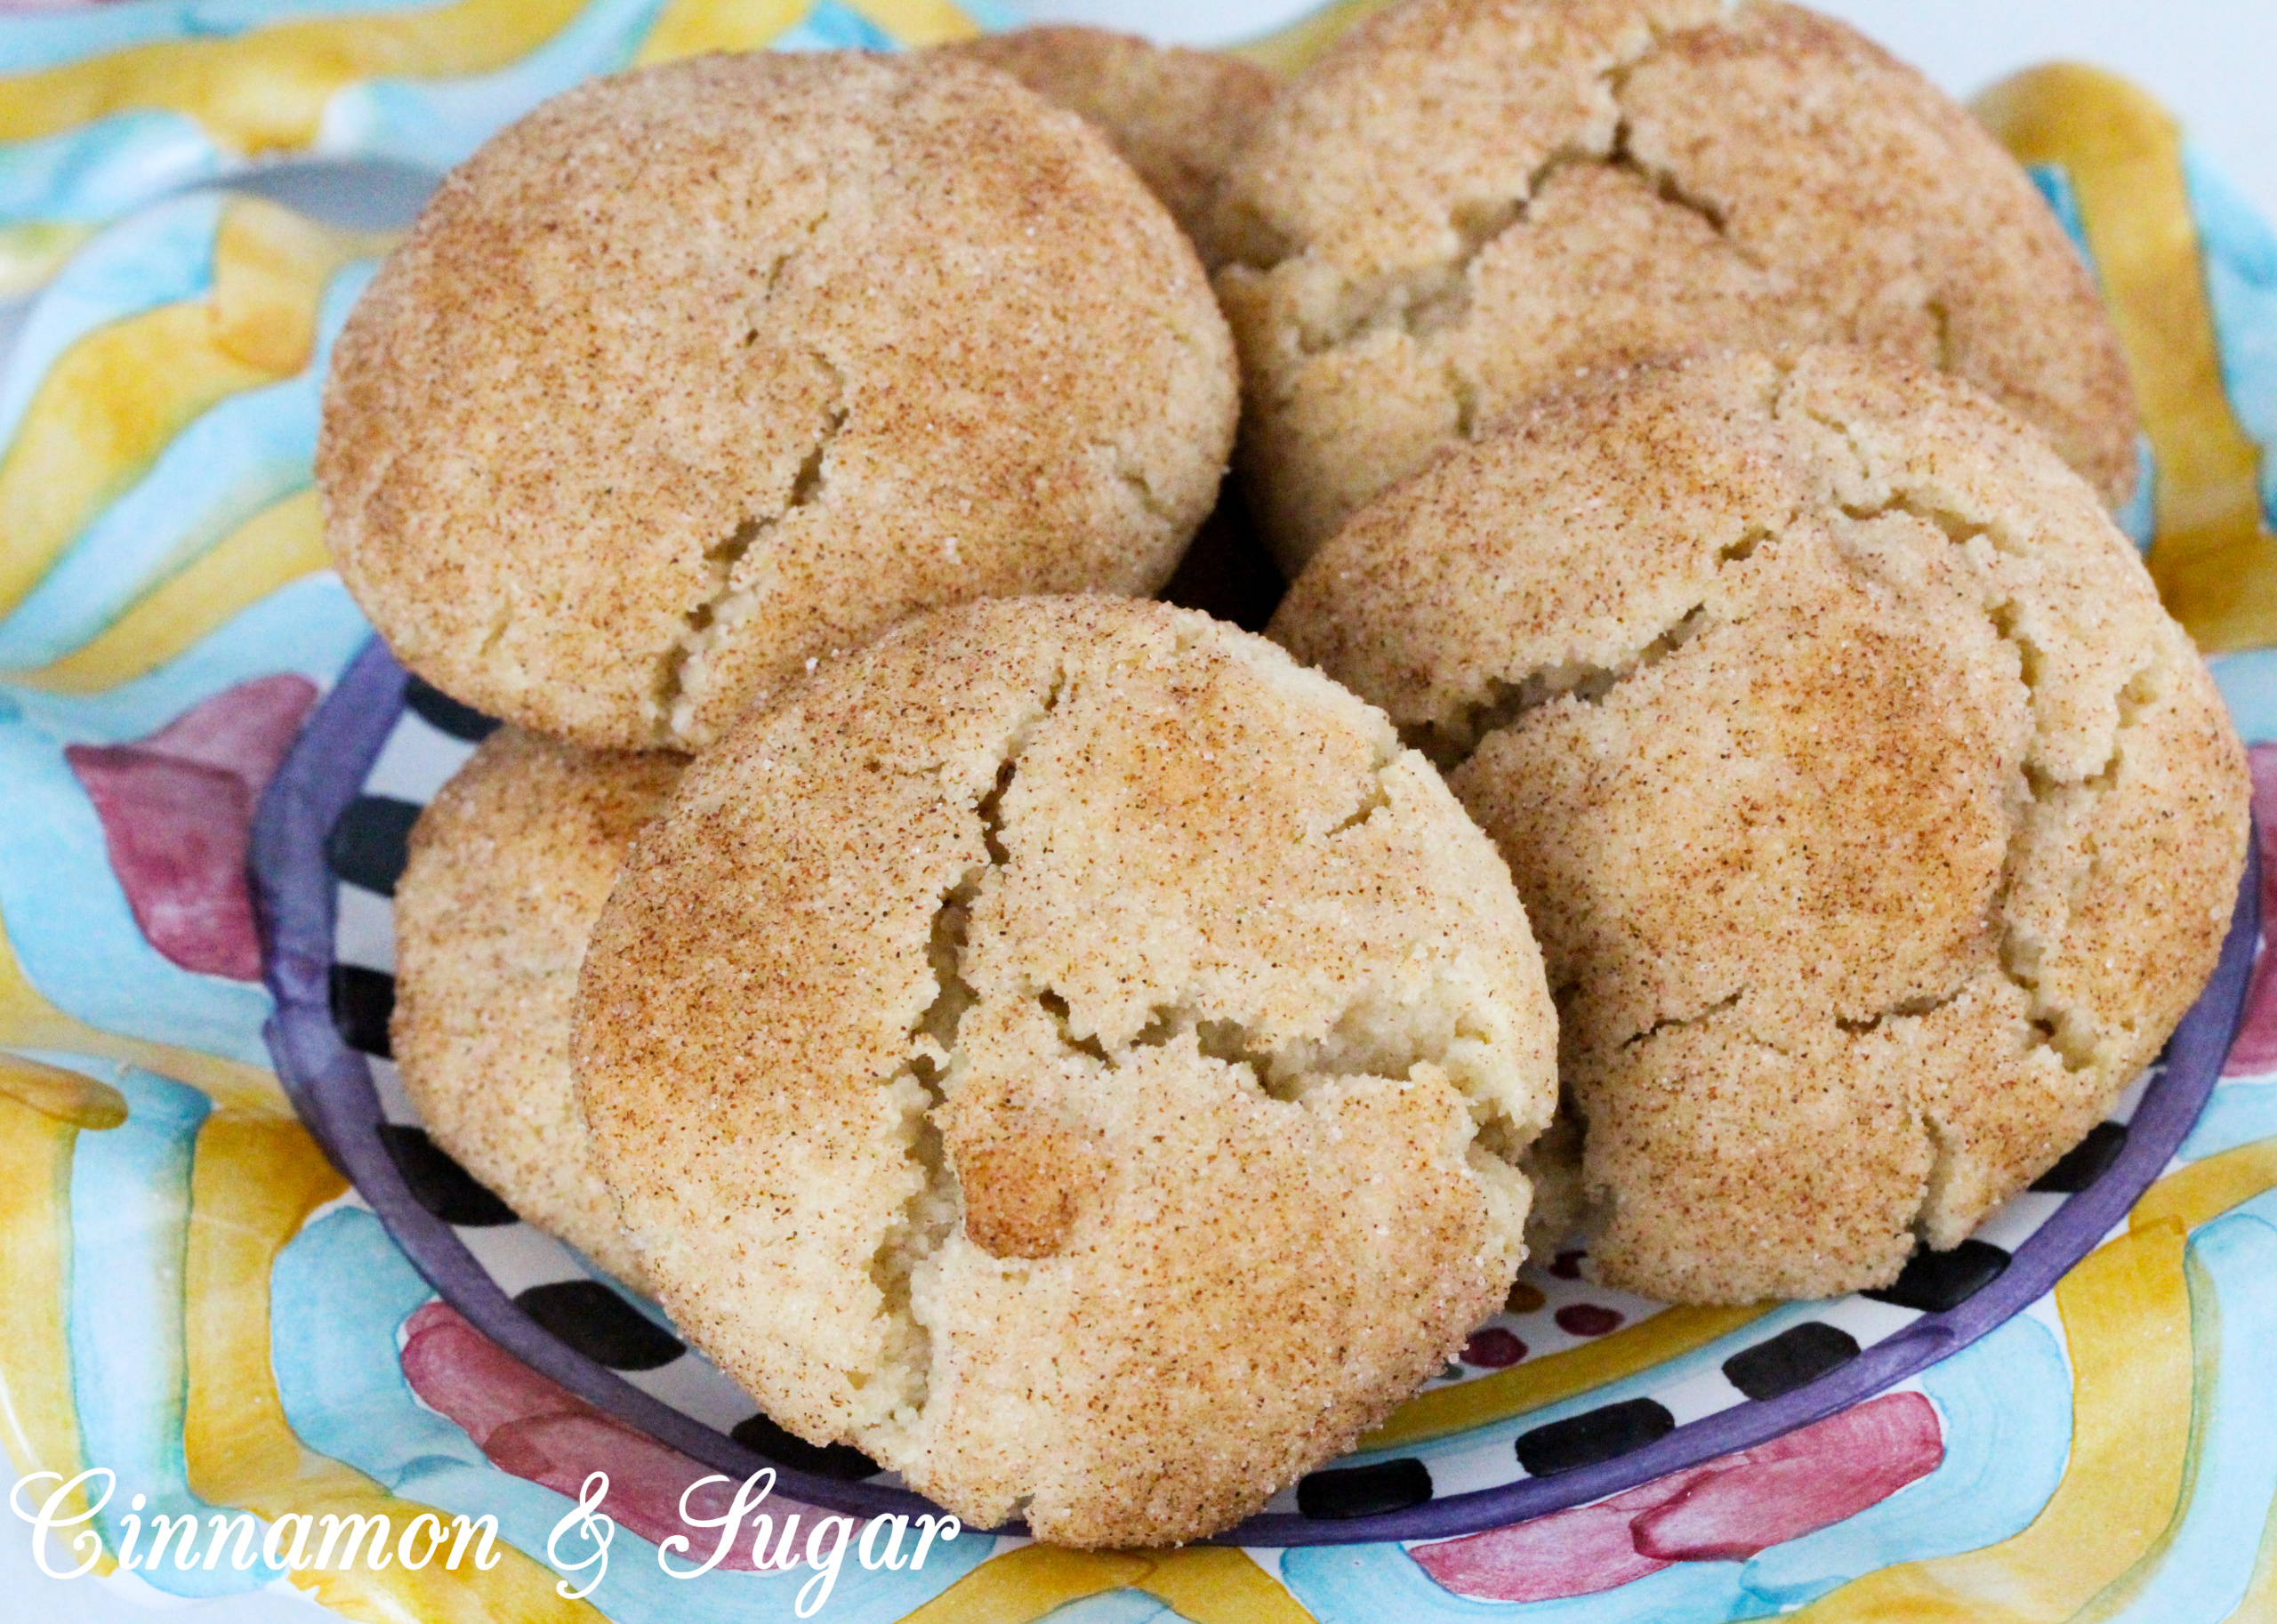 Both gluten-free and dairy-free, Jinx's Gluten-Free Snickerdoodles has just the right amount of cinnamon to add warmth to the soft “buttery” cookie base, while the burst of sugar on the outsides of the cookie melts in your mouth. Recipe shared with permission granted by J.D. Griffo, author of MURDER ON MEMORY LAKE.